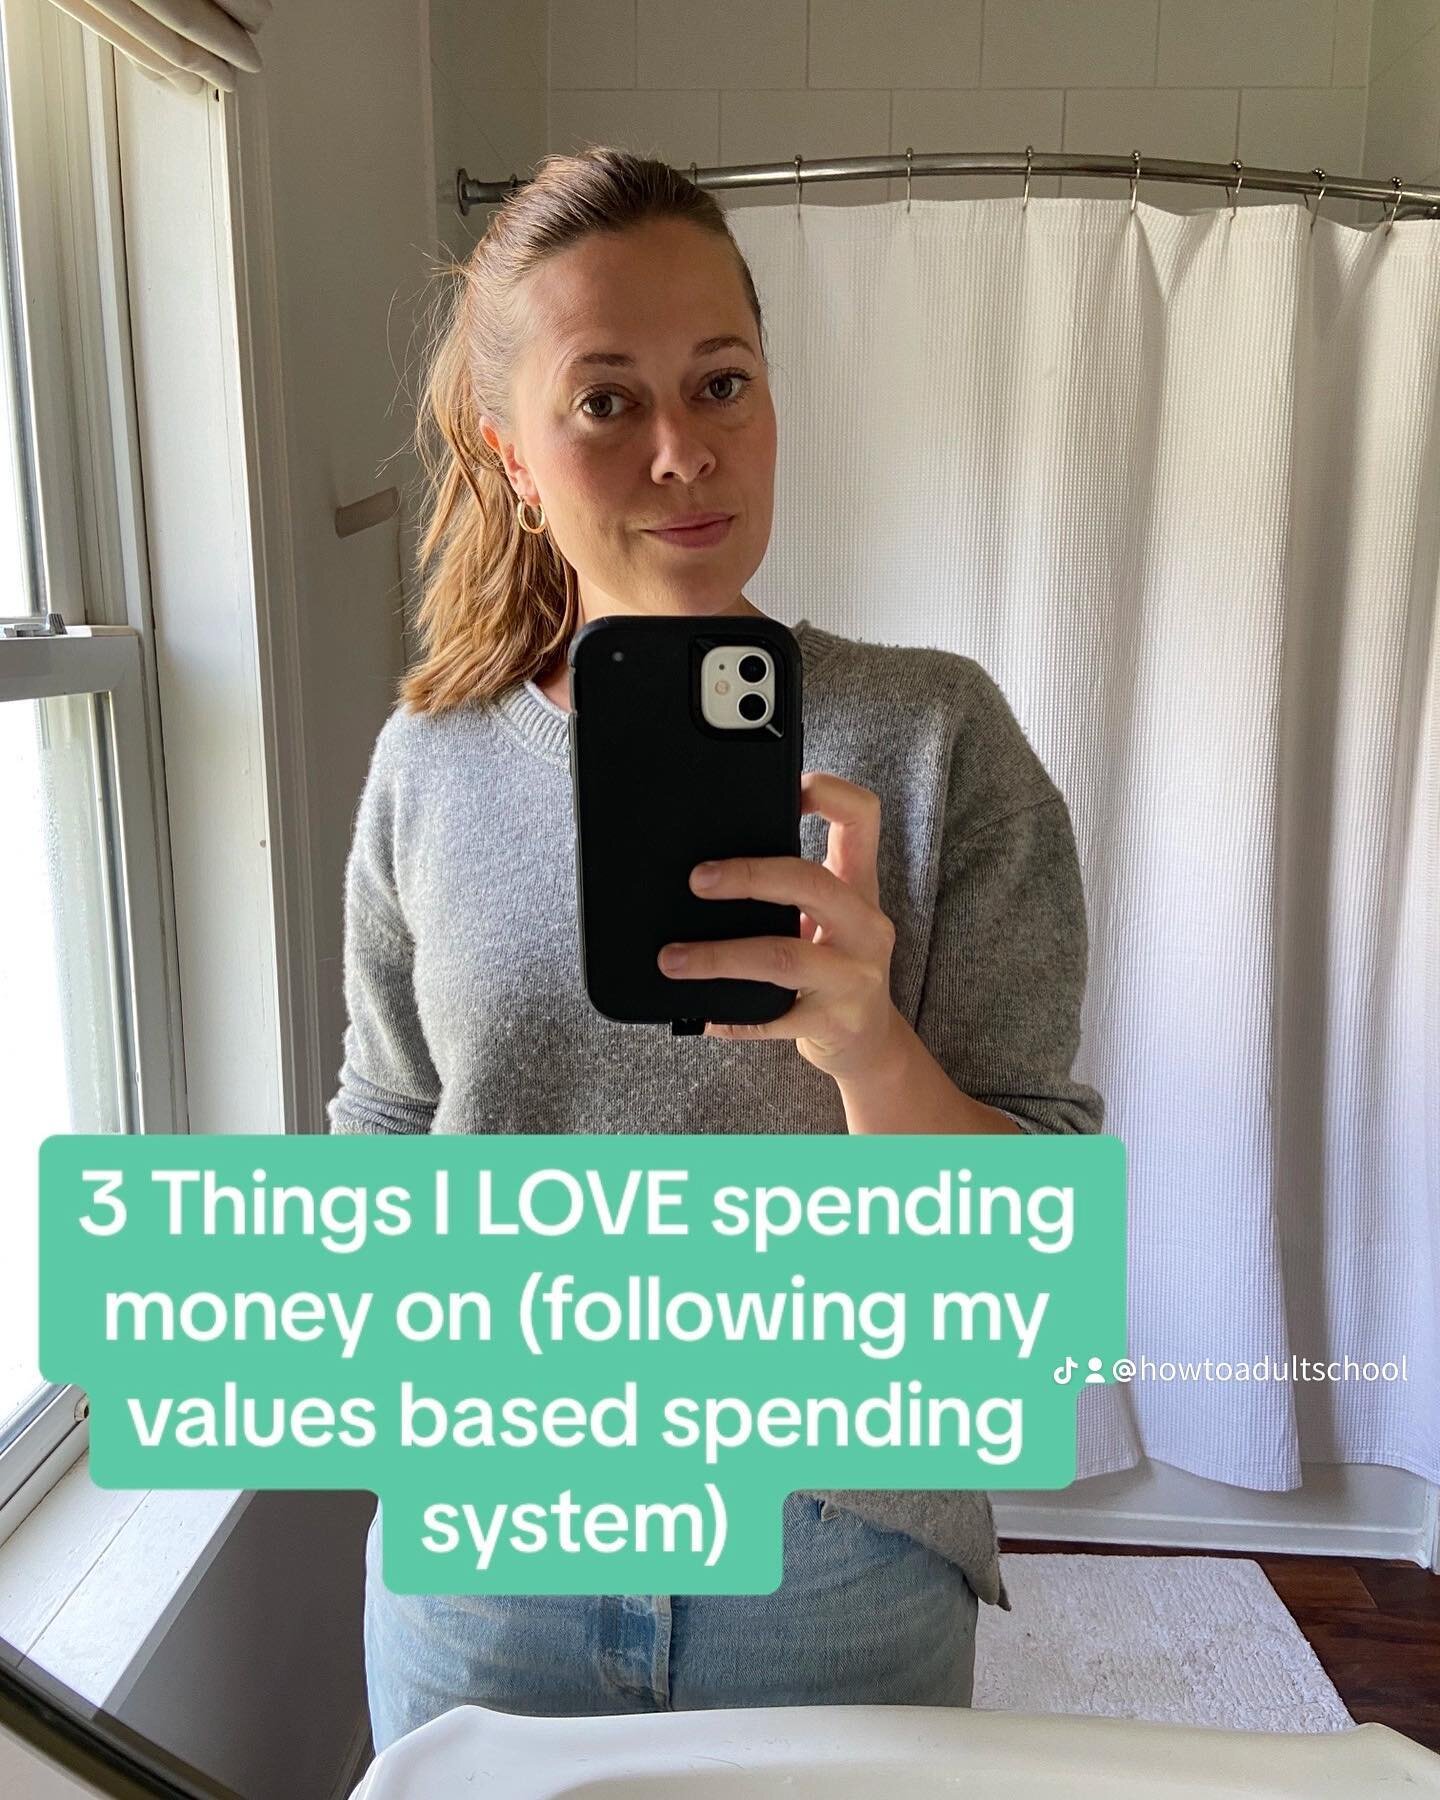 Following a values based spending system is THE life hack to start saving money more easily.
.
Values based spending means choosing 3 of your top financial values and giving yourself permission to spend money guilt free in these areas. Any discretion